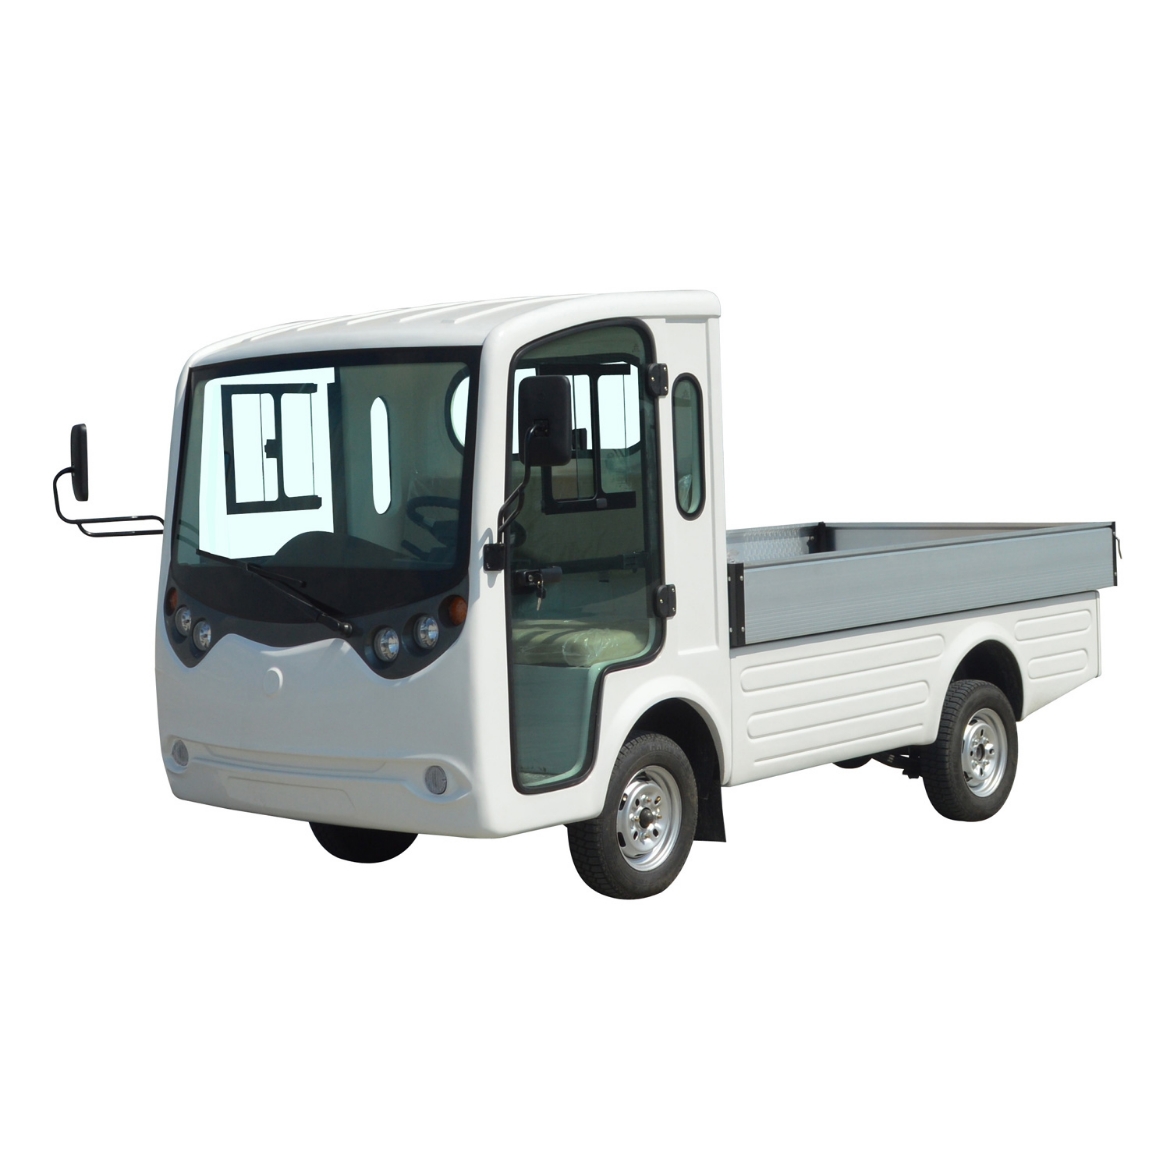 Picture of 2 Seat Truck, 72v 7.5KW AC System, Battery Maintenance Free Batteries, AC Controllers, Motor 75KW AC, Safety Belts, Onborad Charger, 4 Wheel Disc Brake & Handbrake, Power Steering, Rear Tow Bar, Tray Size 2600x1430x265mm